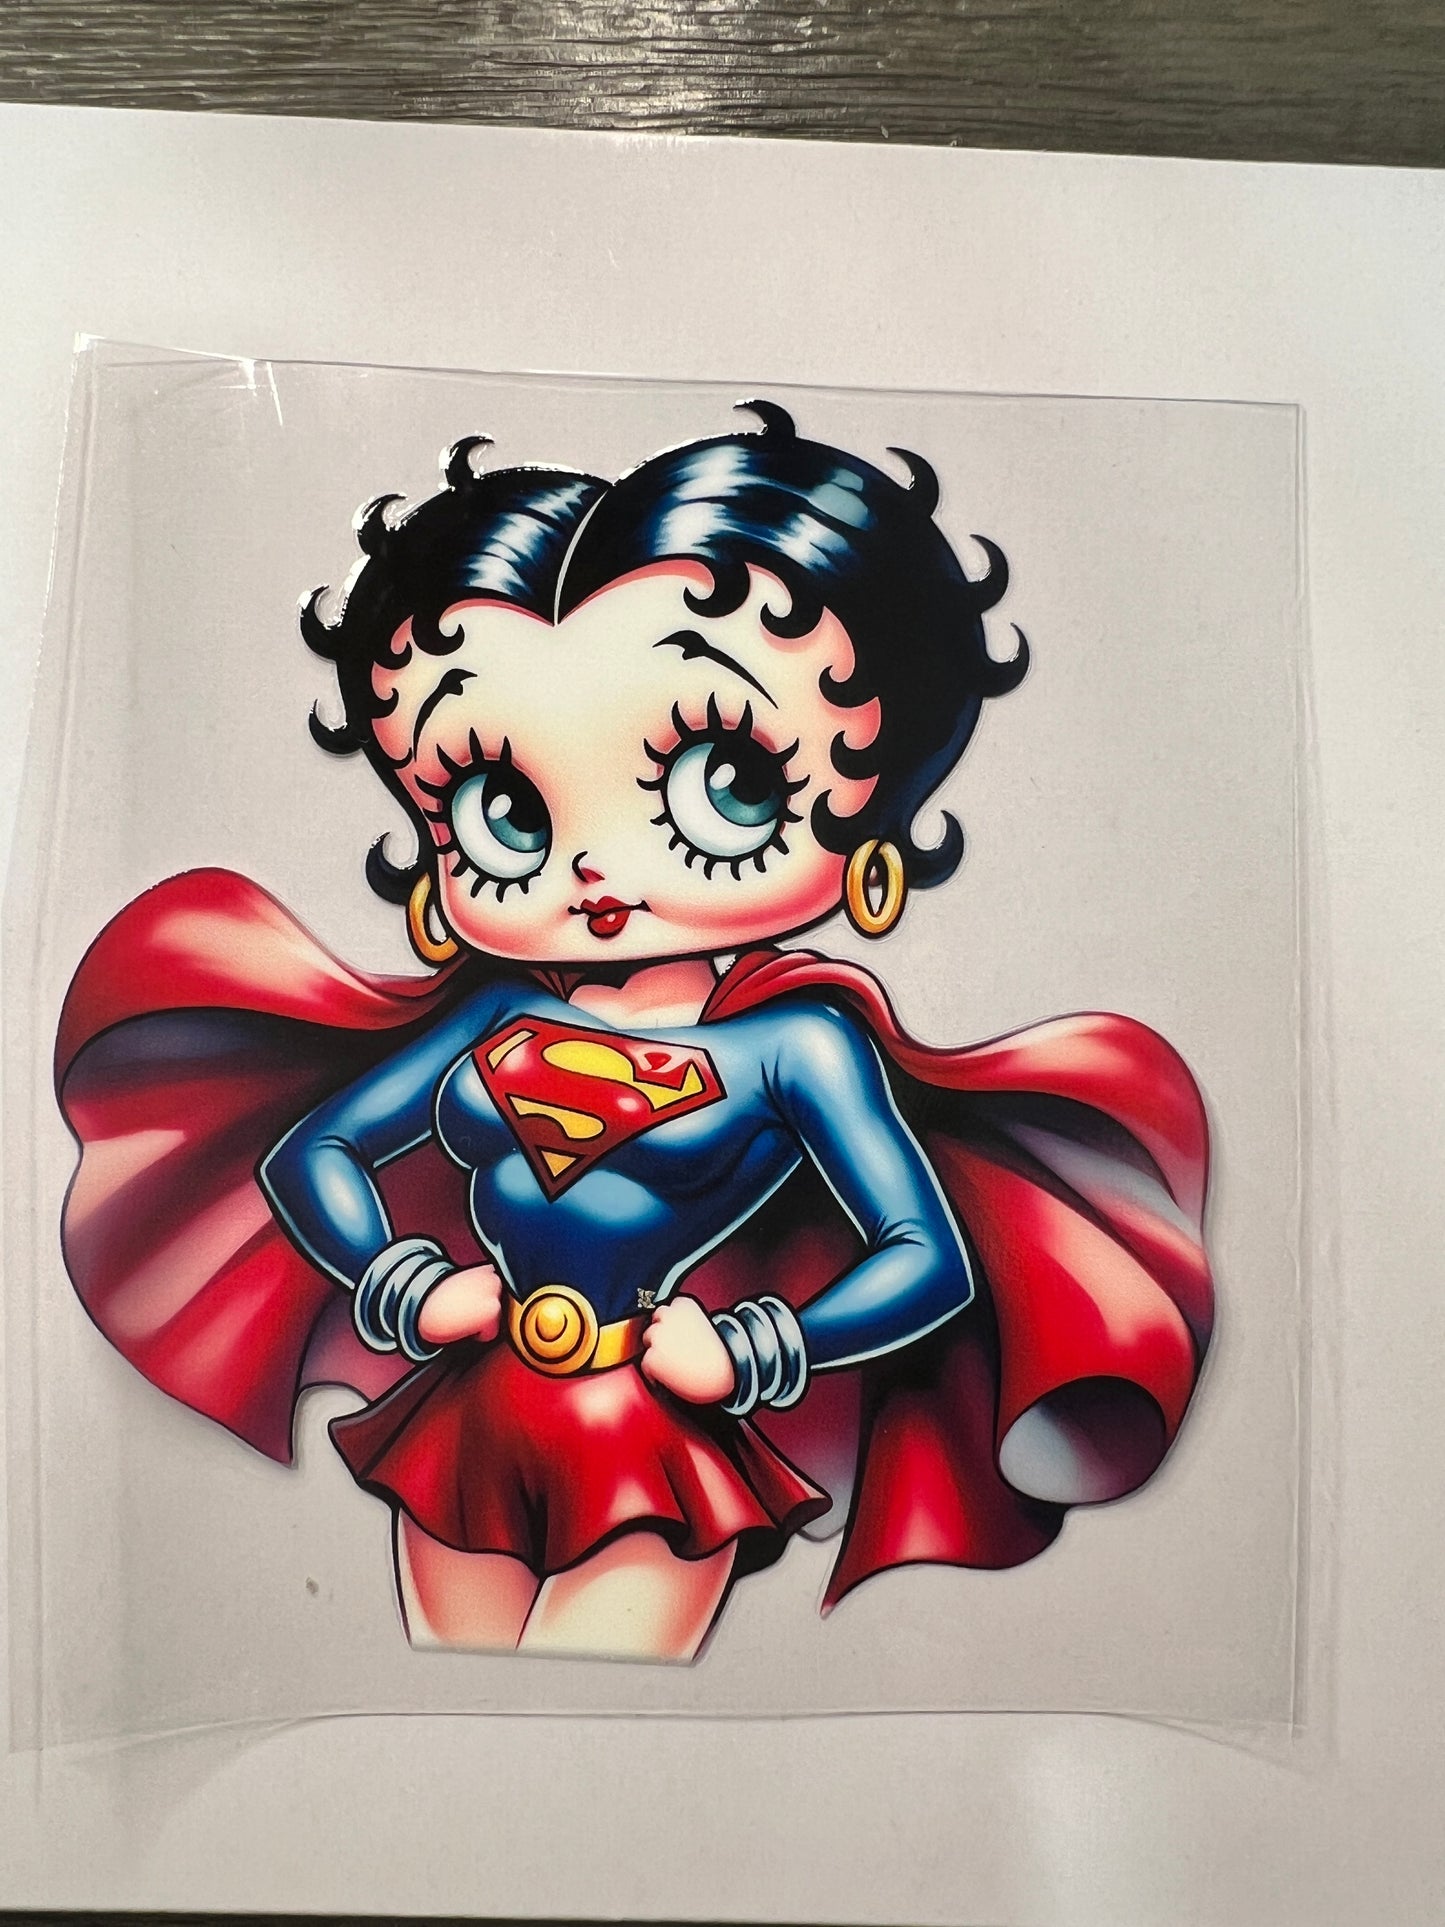 Betty Boop & Decals Transfers